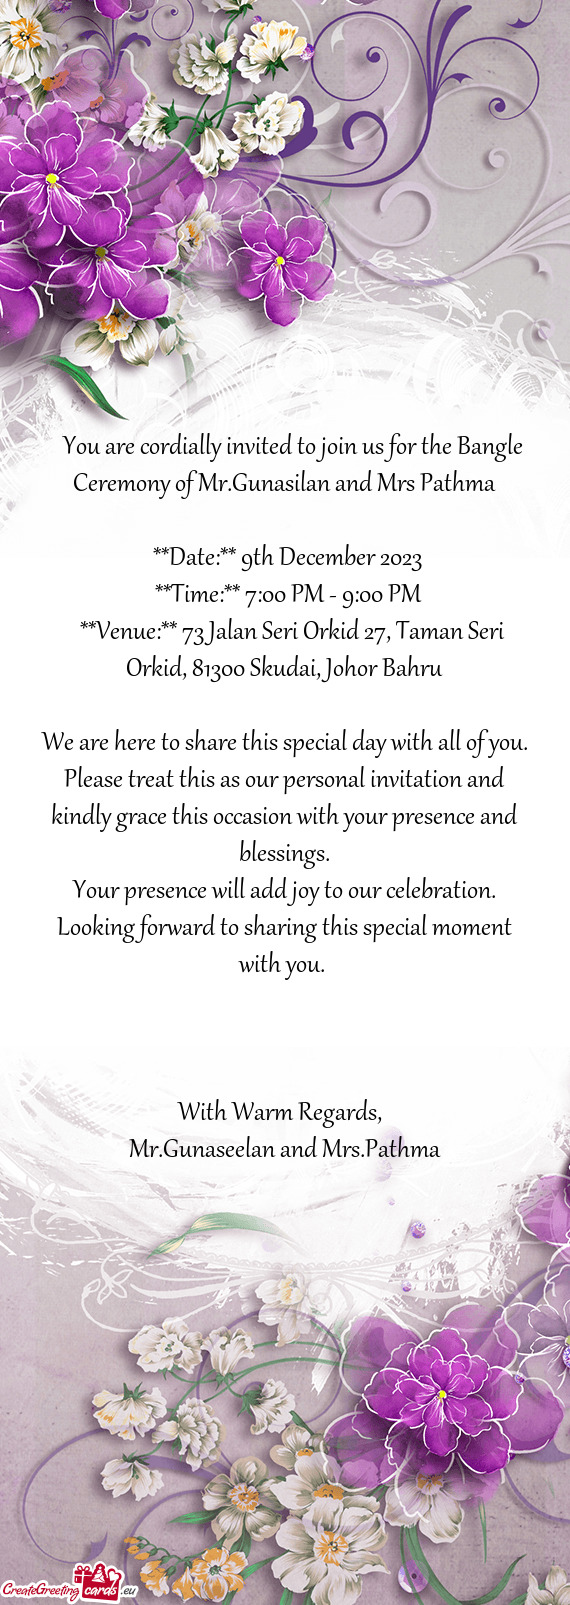 🎉 You are cordially invited to join us for the Bangle Ceremony of Mr.Gunasilan and Mrs Pathma